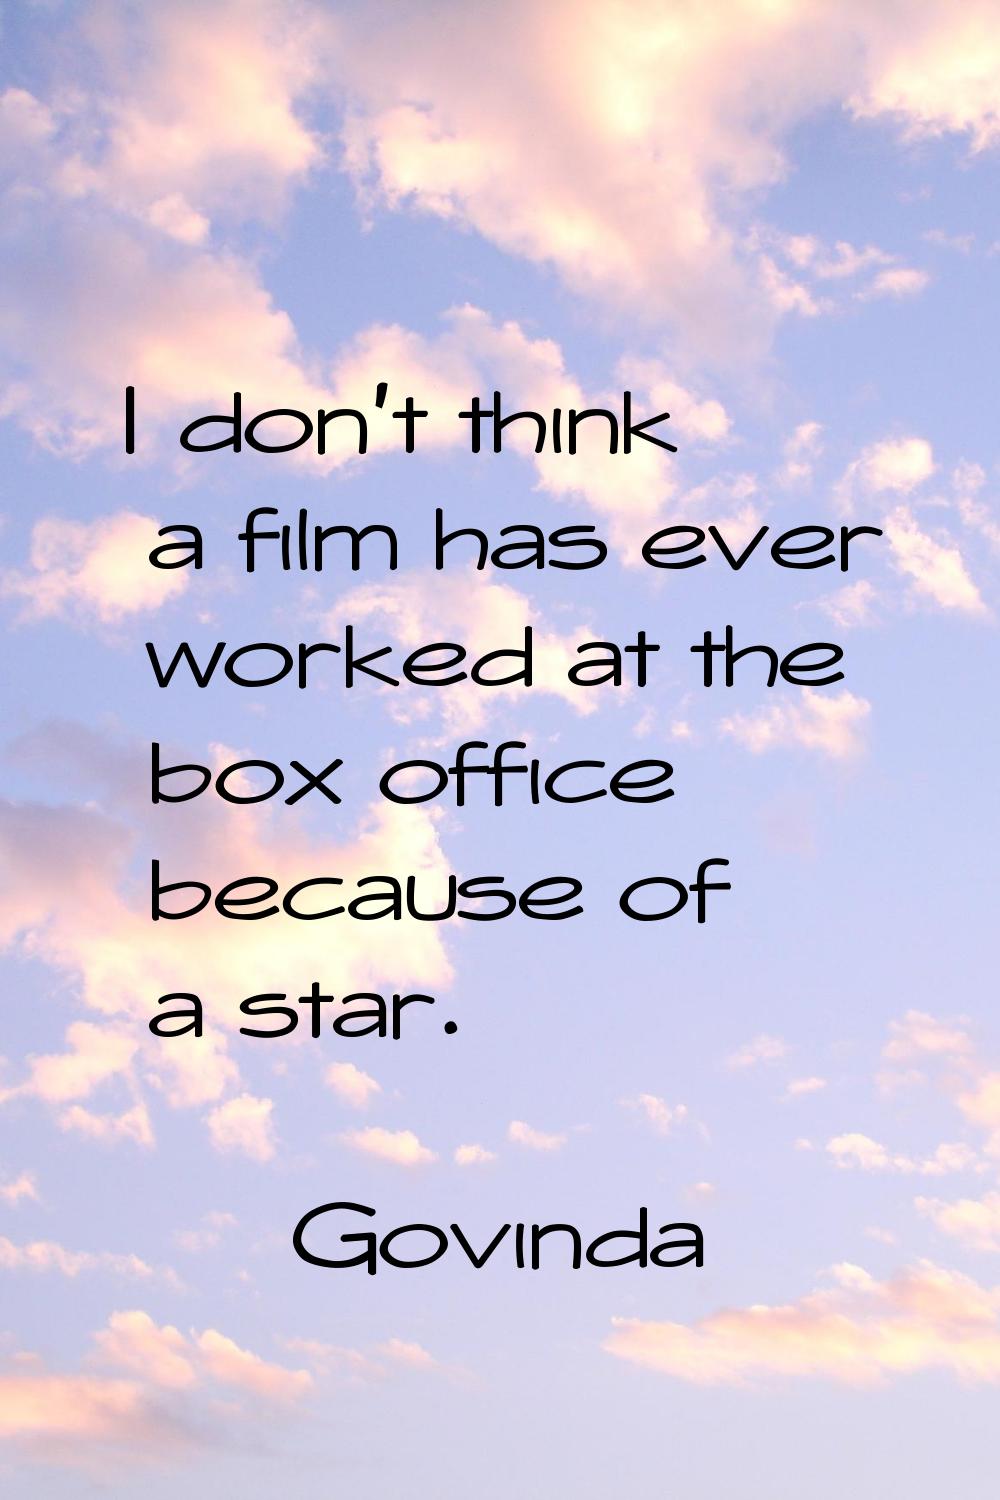 I don't think a film has ever worked at the box office because of a star.